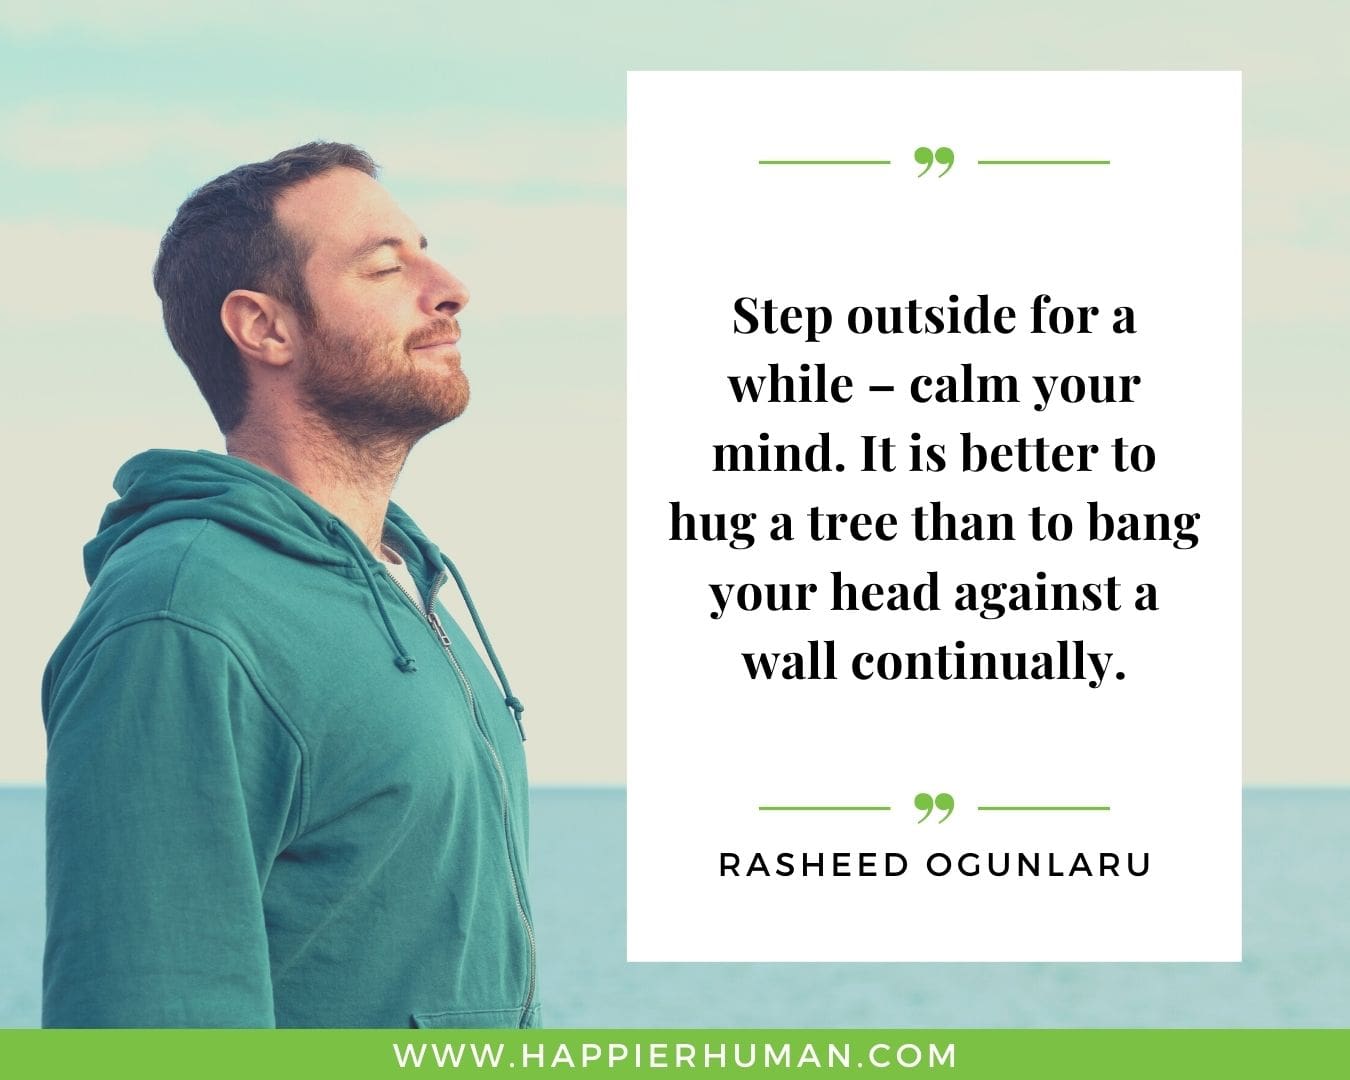 Overthinking Quotes - "Step outside for a while - calm your mind. It is better to hug a tree than to bang your head against a wall continually." - Rasheed Ogunlaru